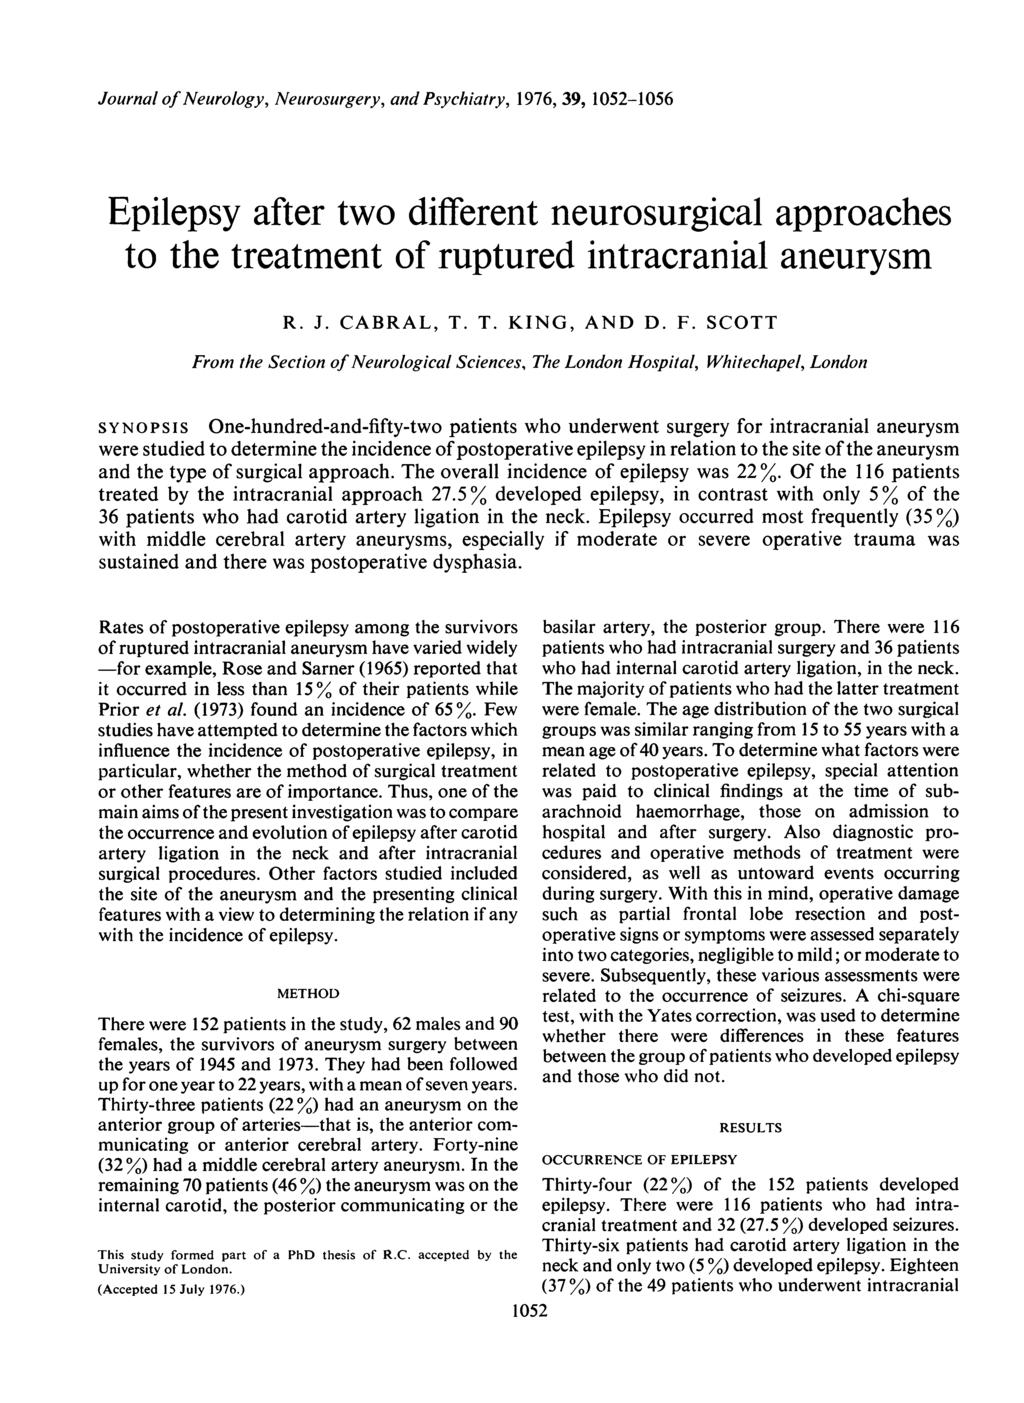 Journal ofneurology, Neurosurgery, and Psychiatry, 1976, 39, 1052-1056 Epilepsy after two different neurosurgical approaches to the treatment of ruptured intracranial aneurysm R. J. CABRAL, T.